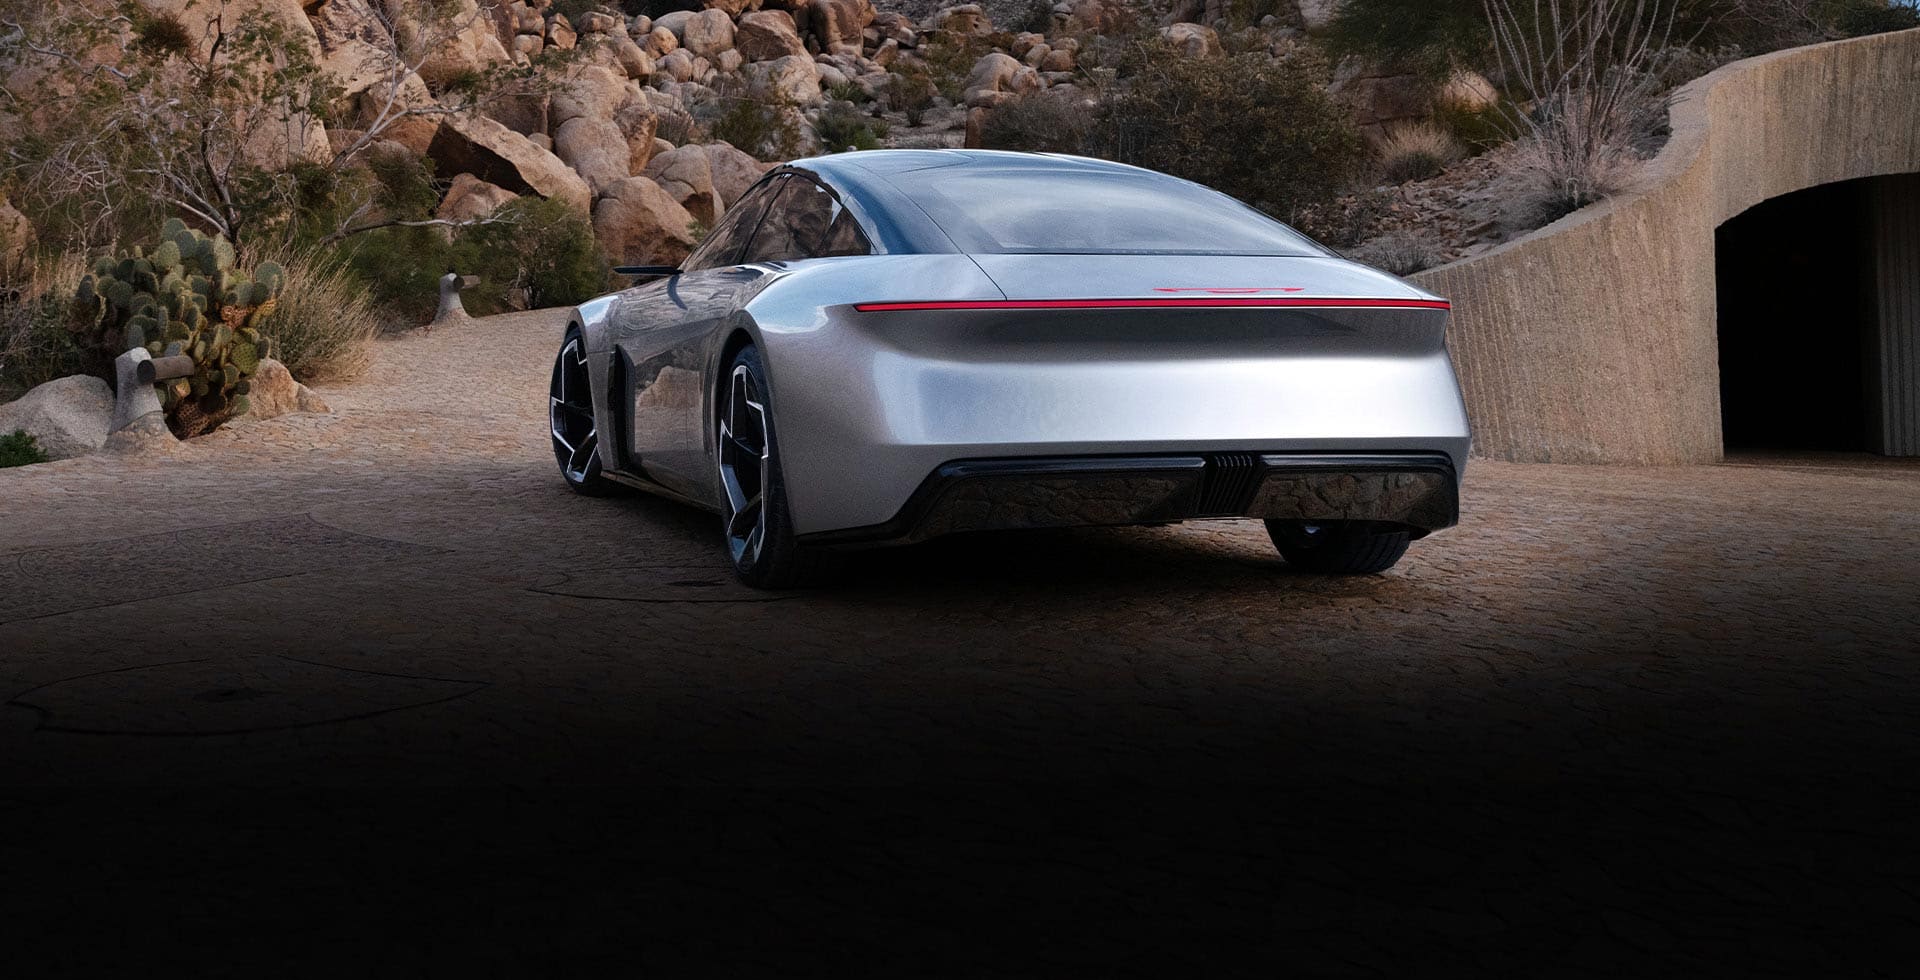 A rear angle of the silver Chrysler Halcyon Concept vehicle parked on a clearing outside a tunnel, with rock formations in the background.